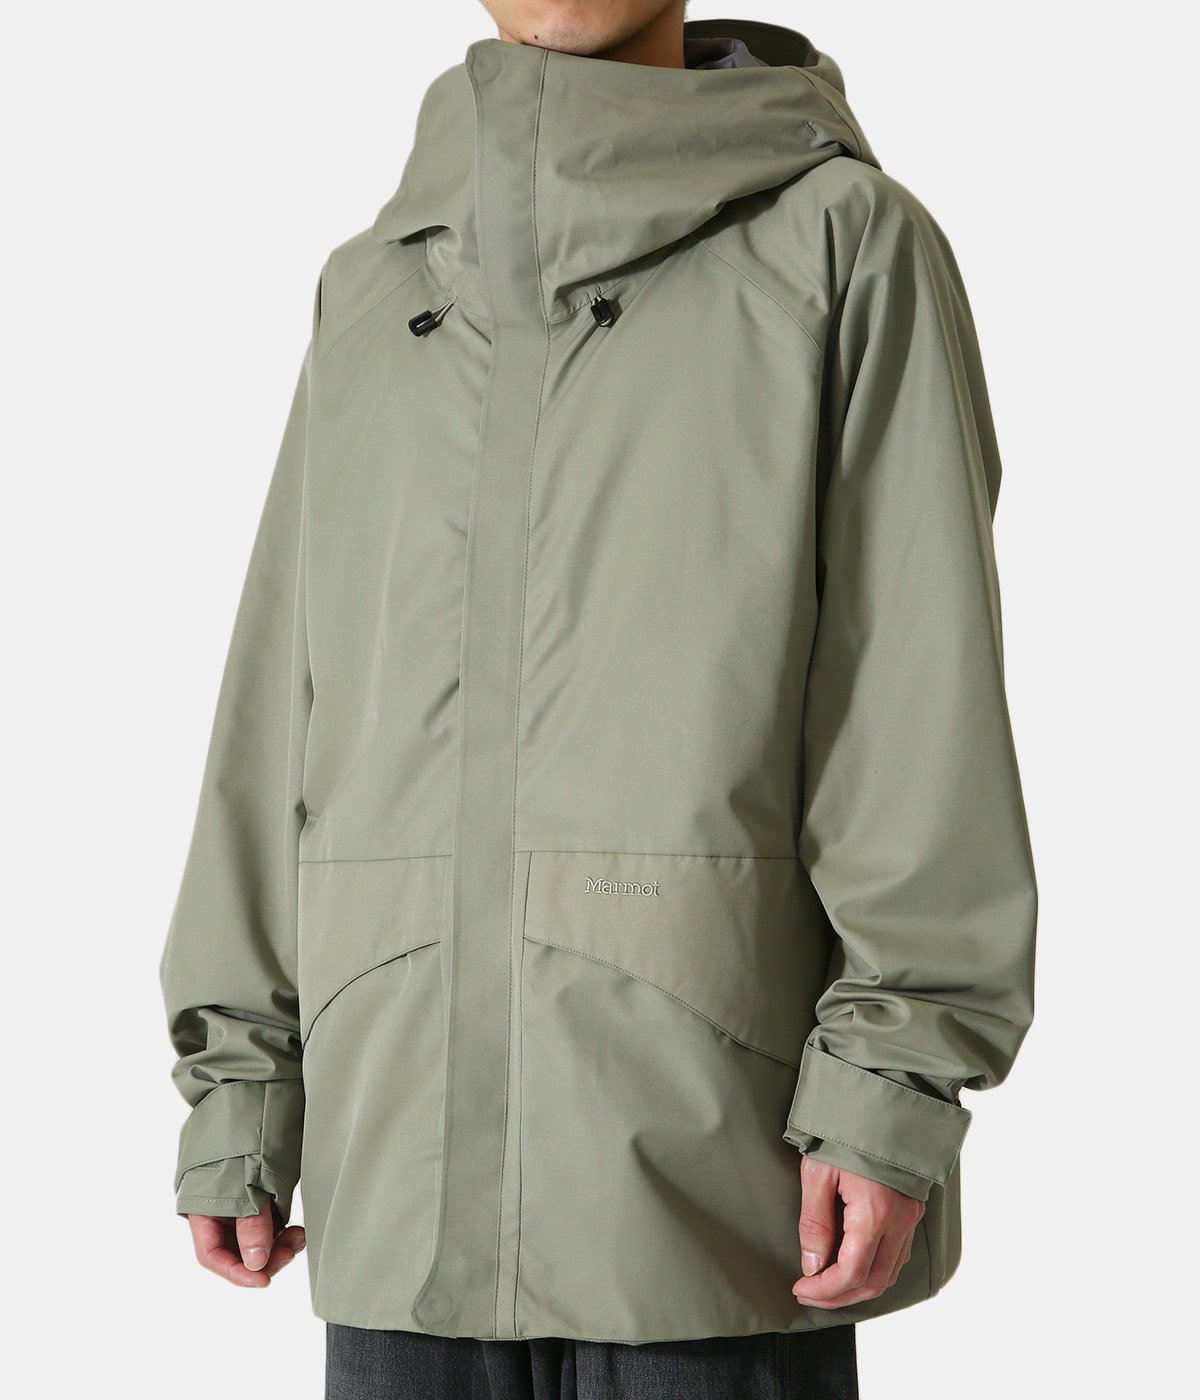 All Weather Kit Parka | Marmot infuse(マーモットインフューズ 